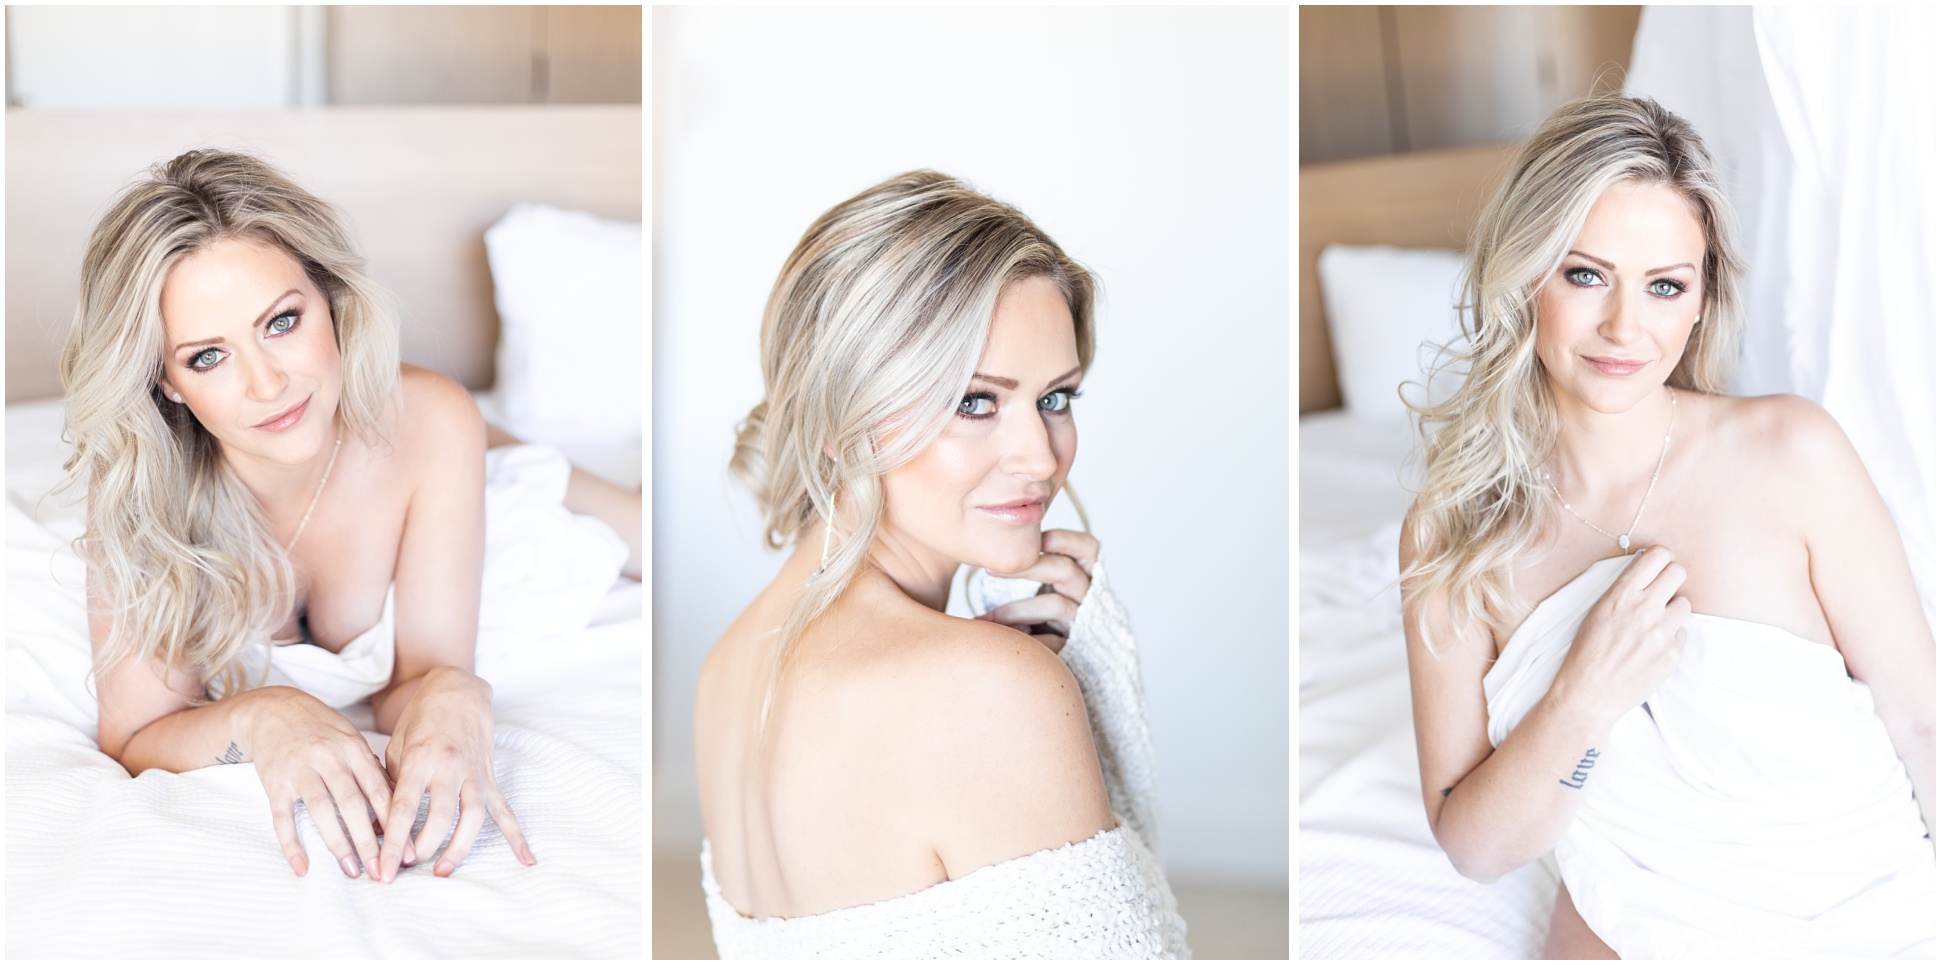 Three Images of Heather Godby's Boudoir Session with MaeWood Photography